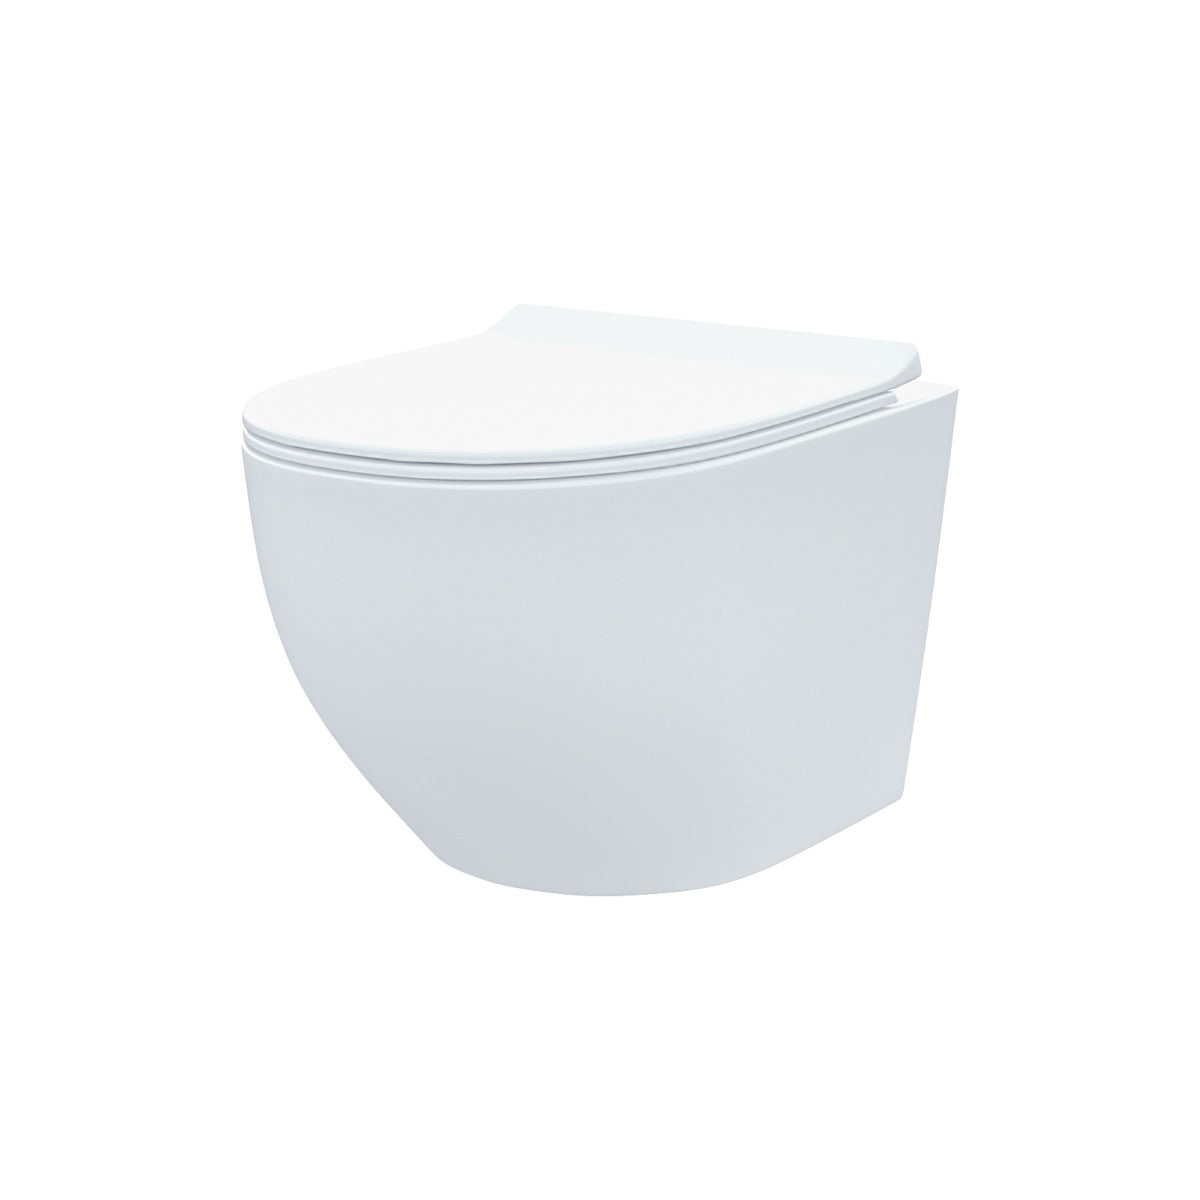 Declan Rimless Wall Hung Toilet Pan with Framed Cistern